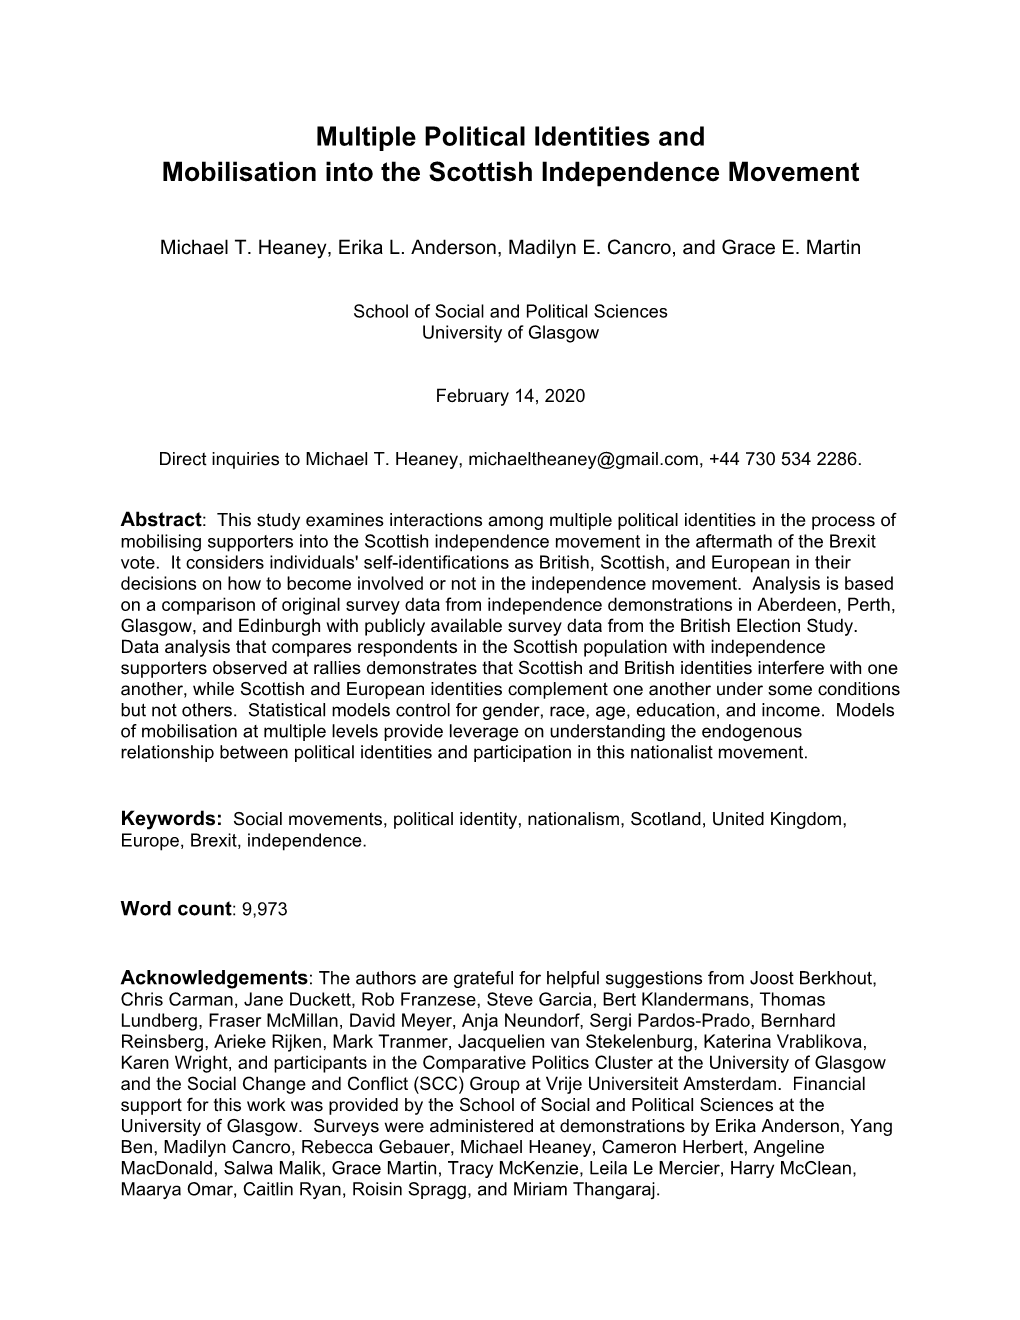 Multiple Political Identities and Mobilisation Into the Scottish Independence Movement